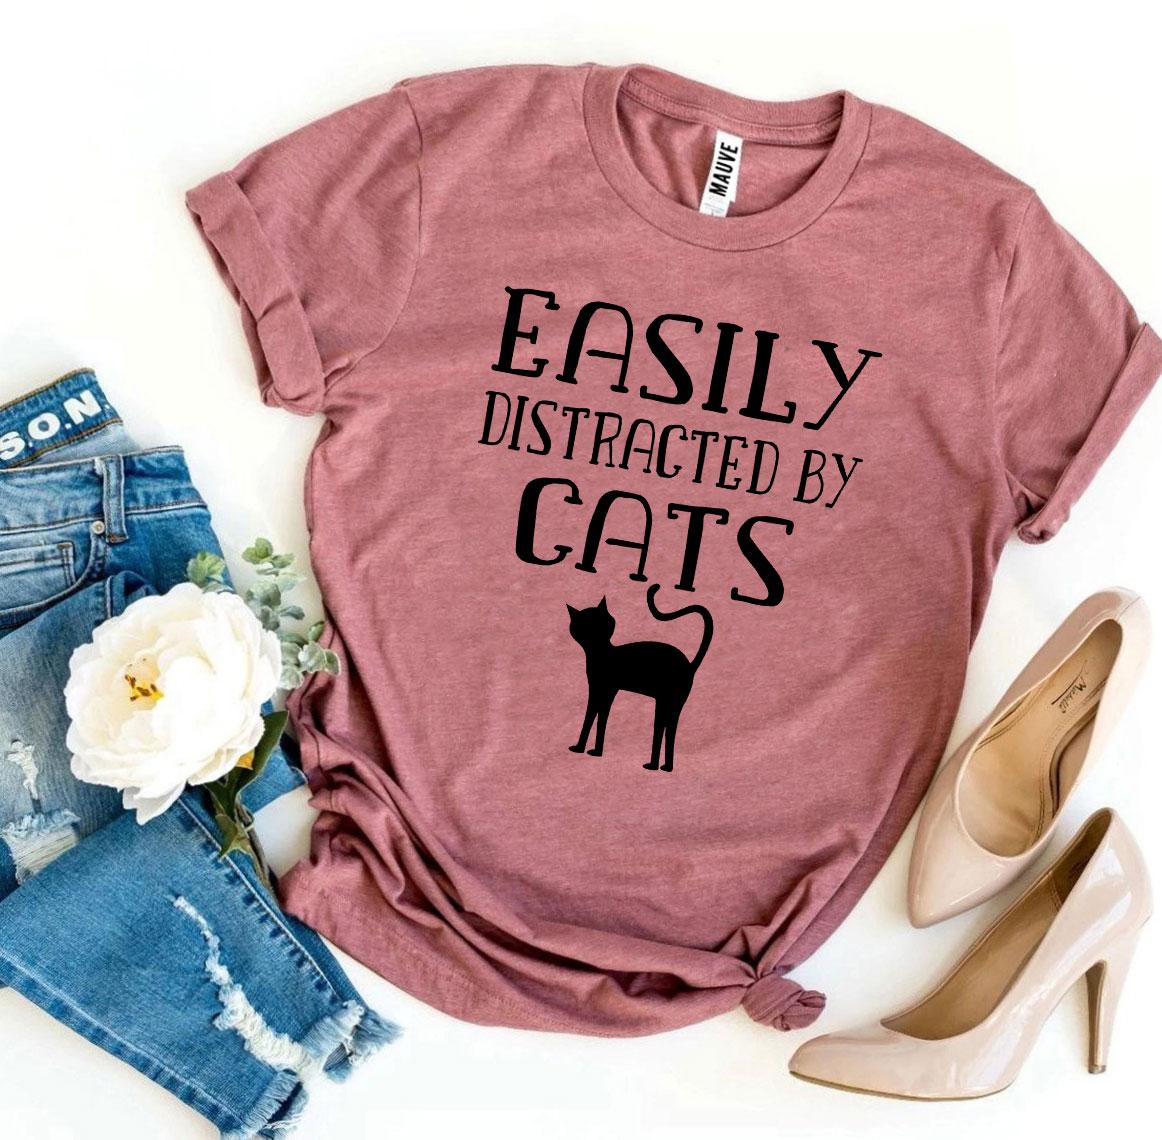 Easily Distracted By Cats T-Shirt